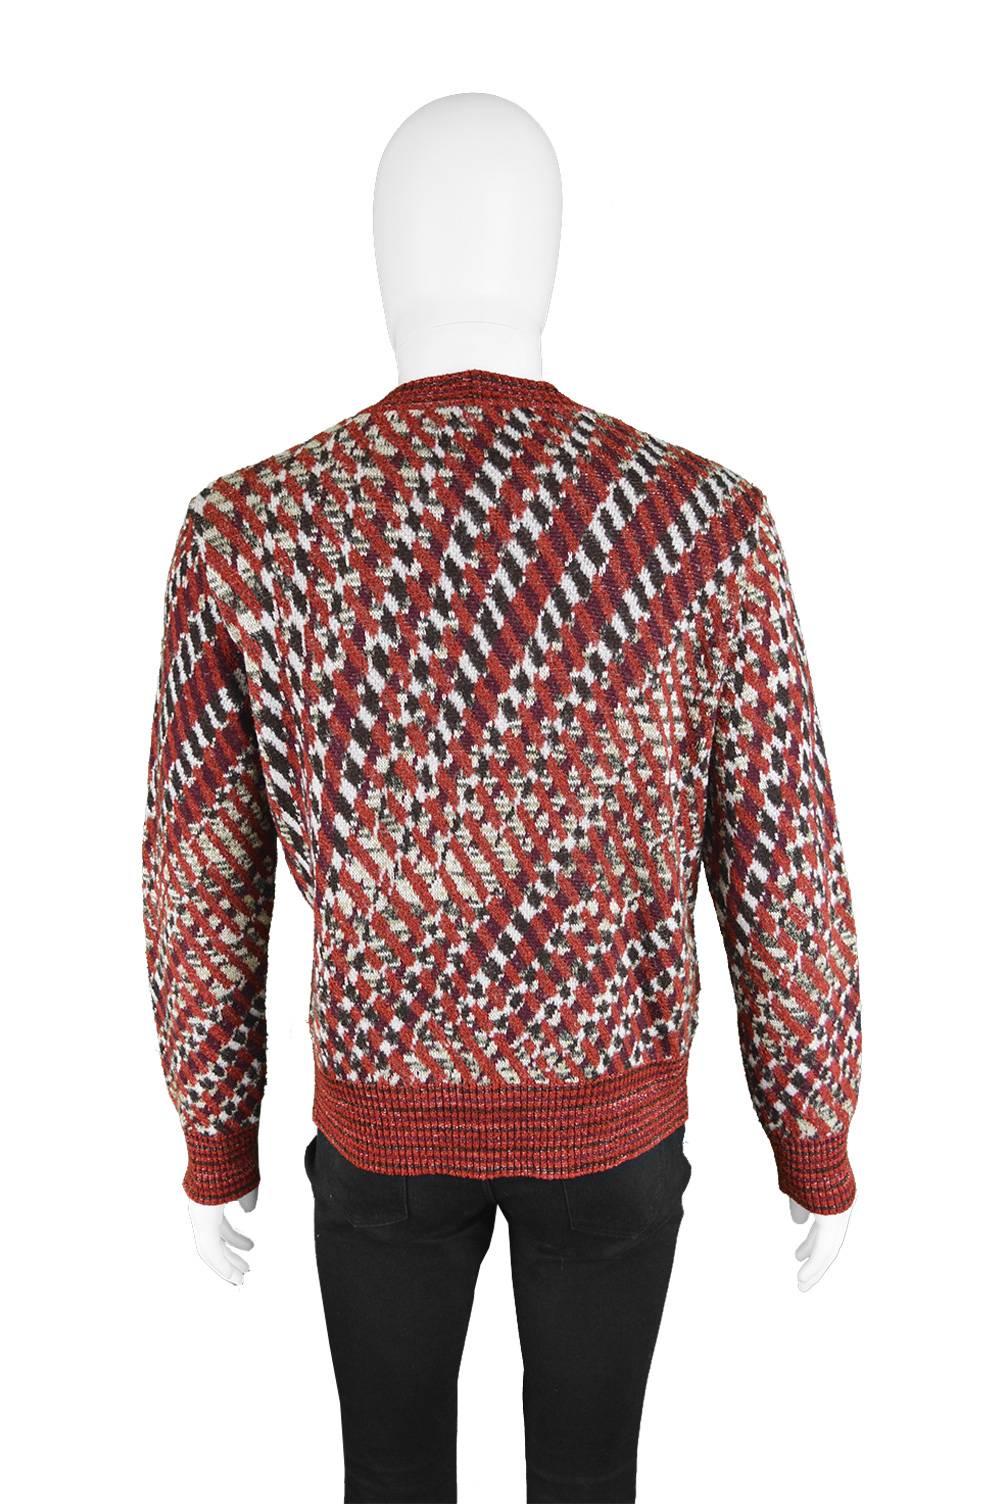  Missoni Men's Vintage 1980s Red Patterned Wool Rayon & Mohair Blend Sweater For Sale 1